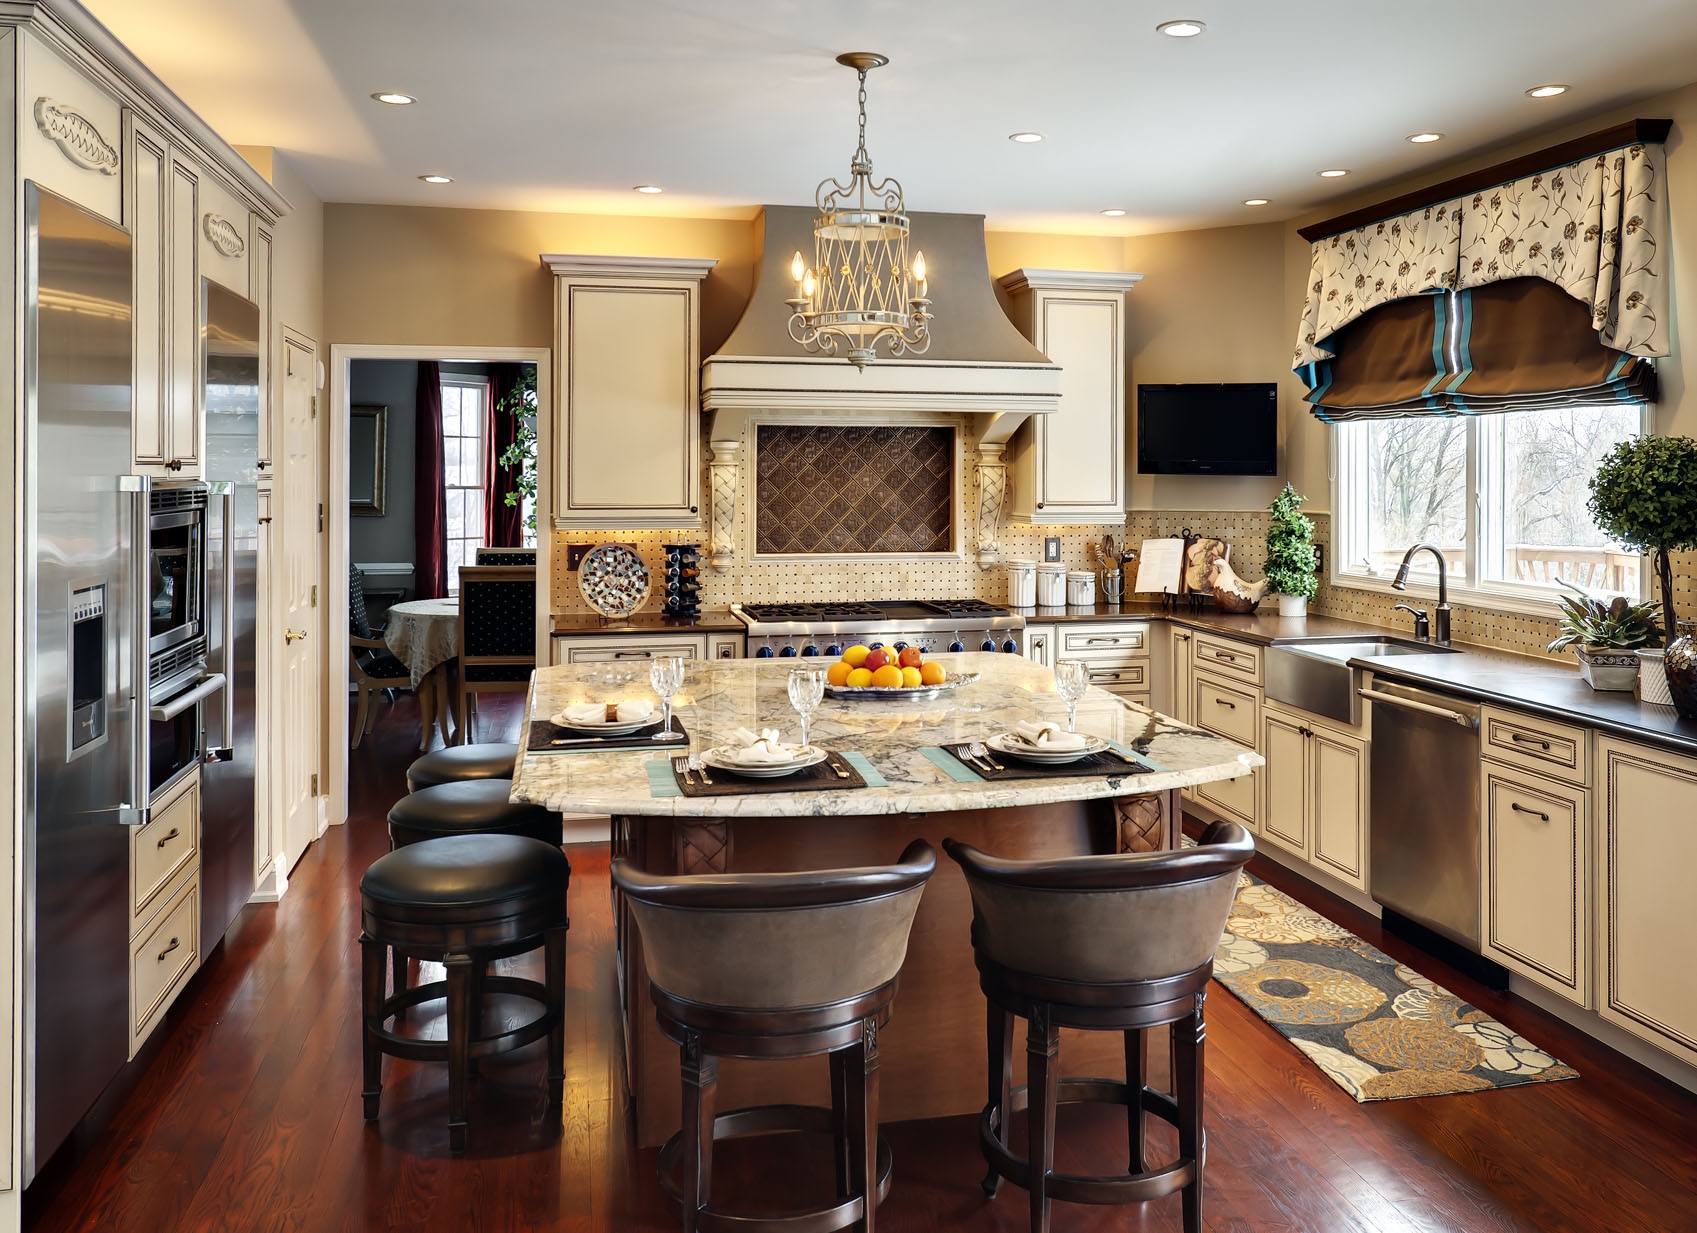 What’s Cookin’ in the Kitchen? | Decorating Den Interiors Blog ...